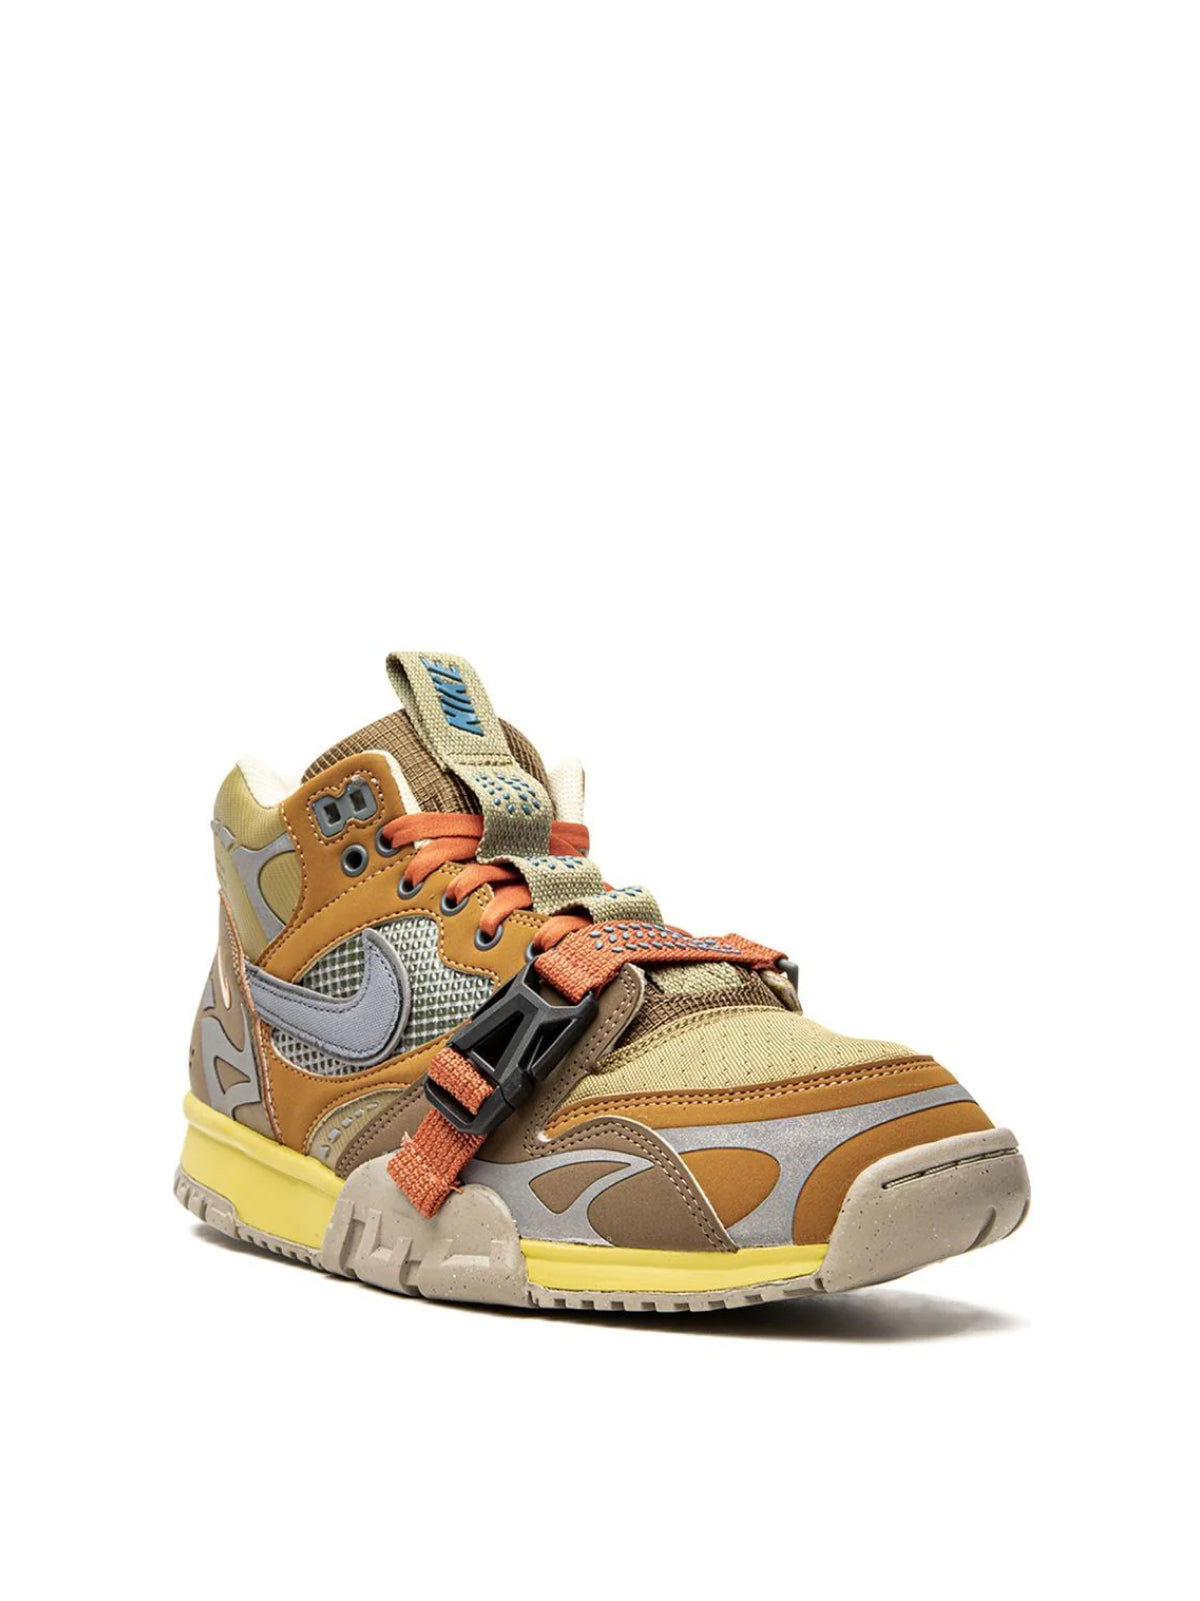 Nike-OUTLET-SALE-Air Trainer 1 SP Coriander Sneakers-ARCHIVIST